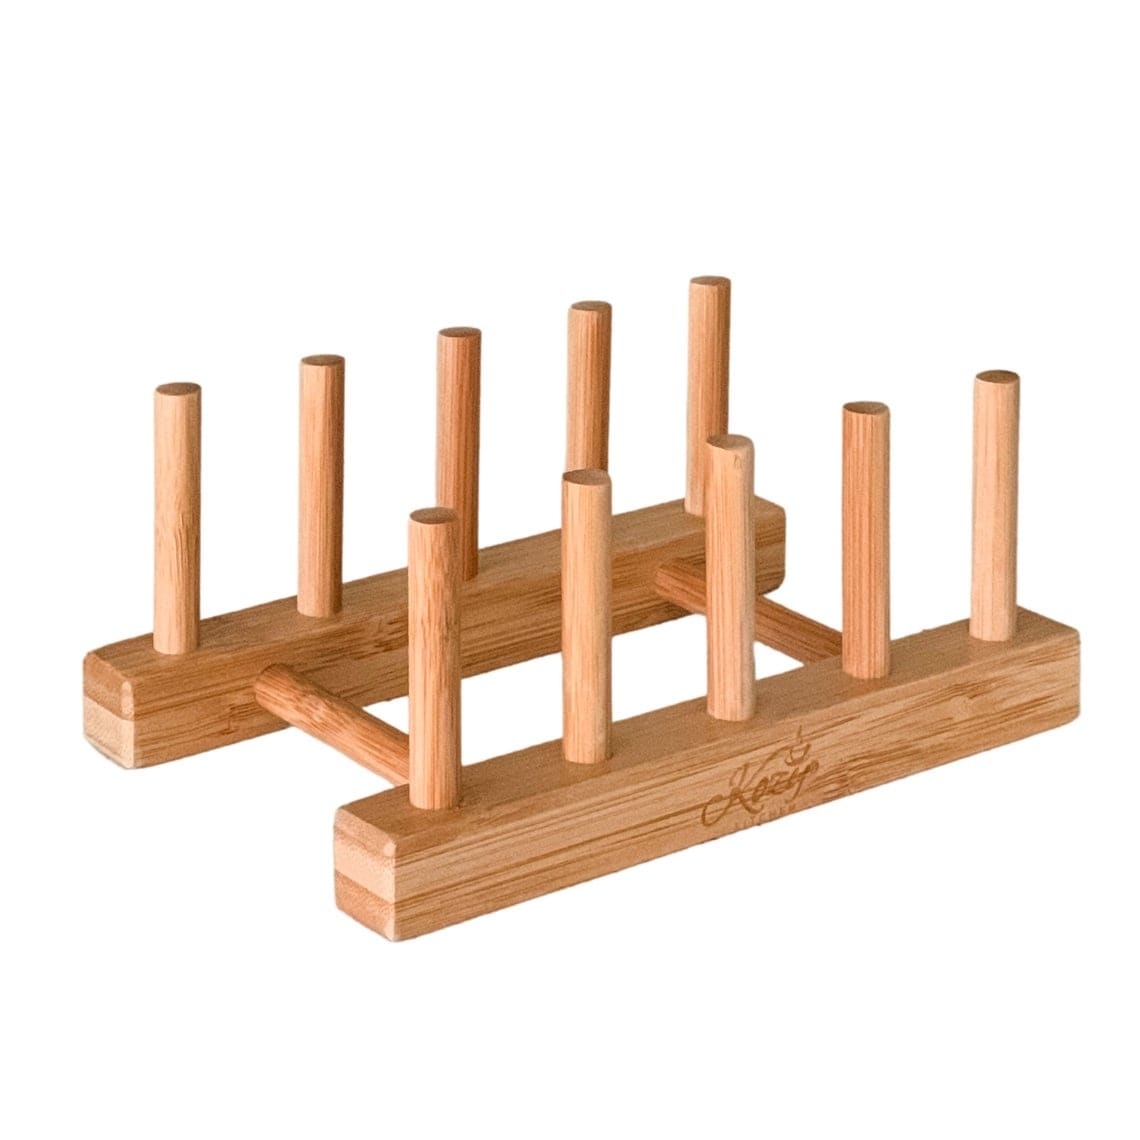 https://ak1.ostkcdn.com/images/products/is/images/direct/8c9e13ed3f7273d620590e83a955258fbbf79918/Bamboo-Dish-Rack-Plates-Holder-Kitchen-Storage-Cabinet-Organizer.jpg